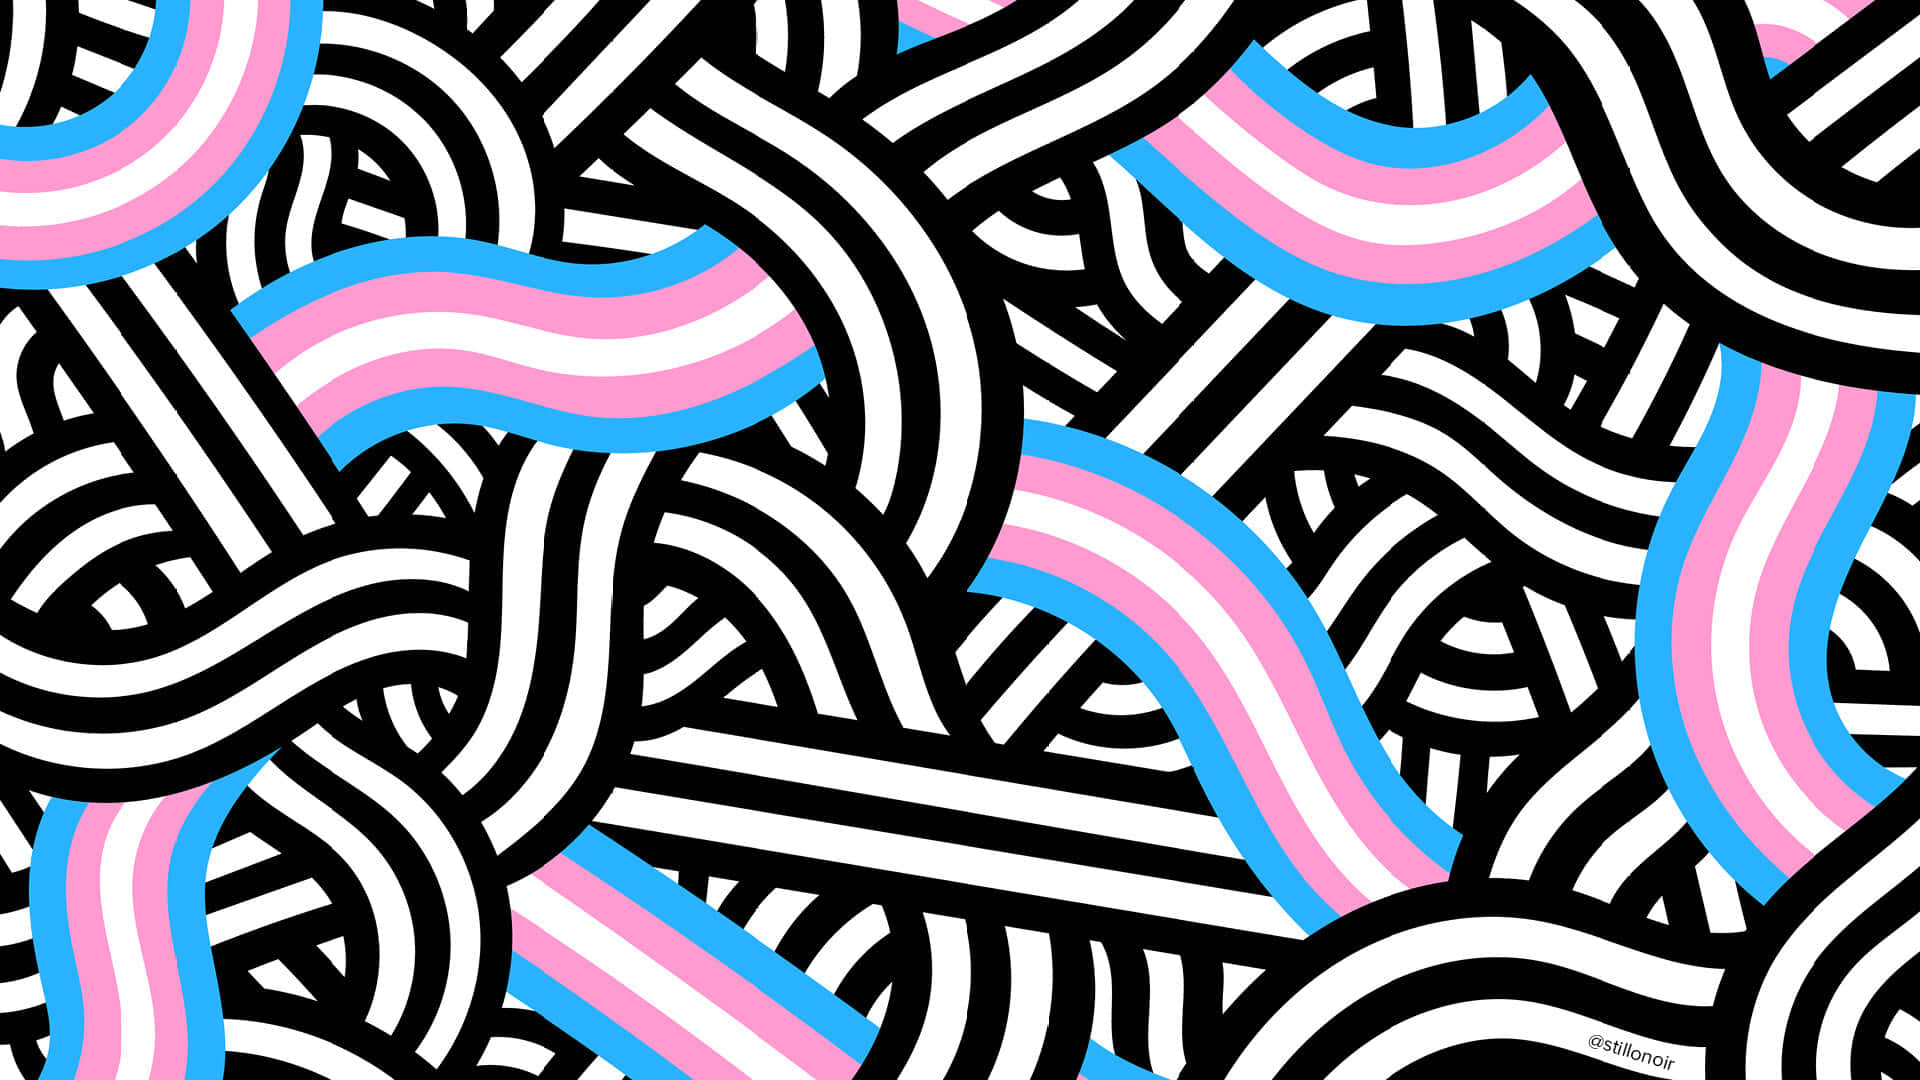 Celebrate and support gender identity and expression with the Trans Flag Wallpaper